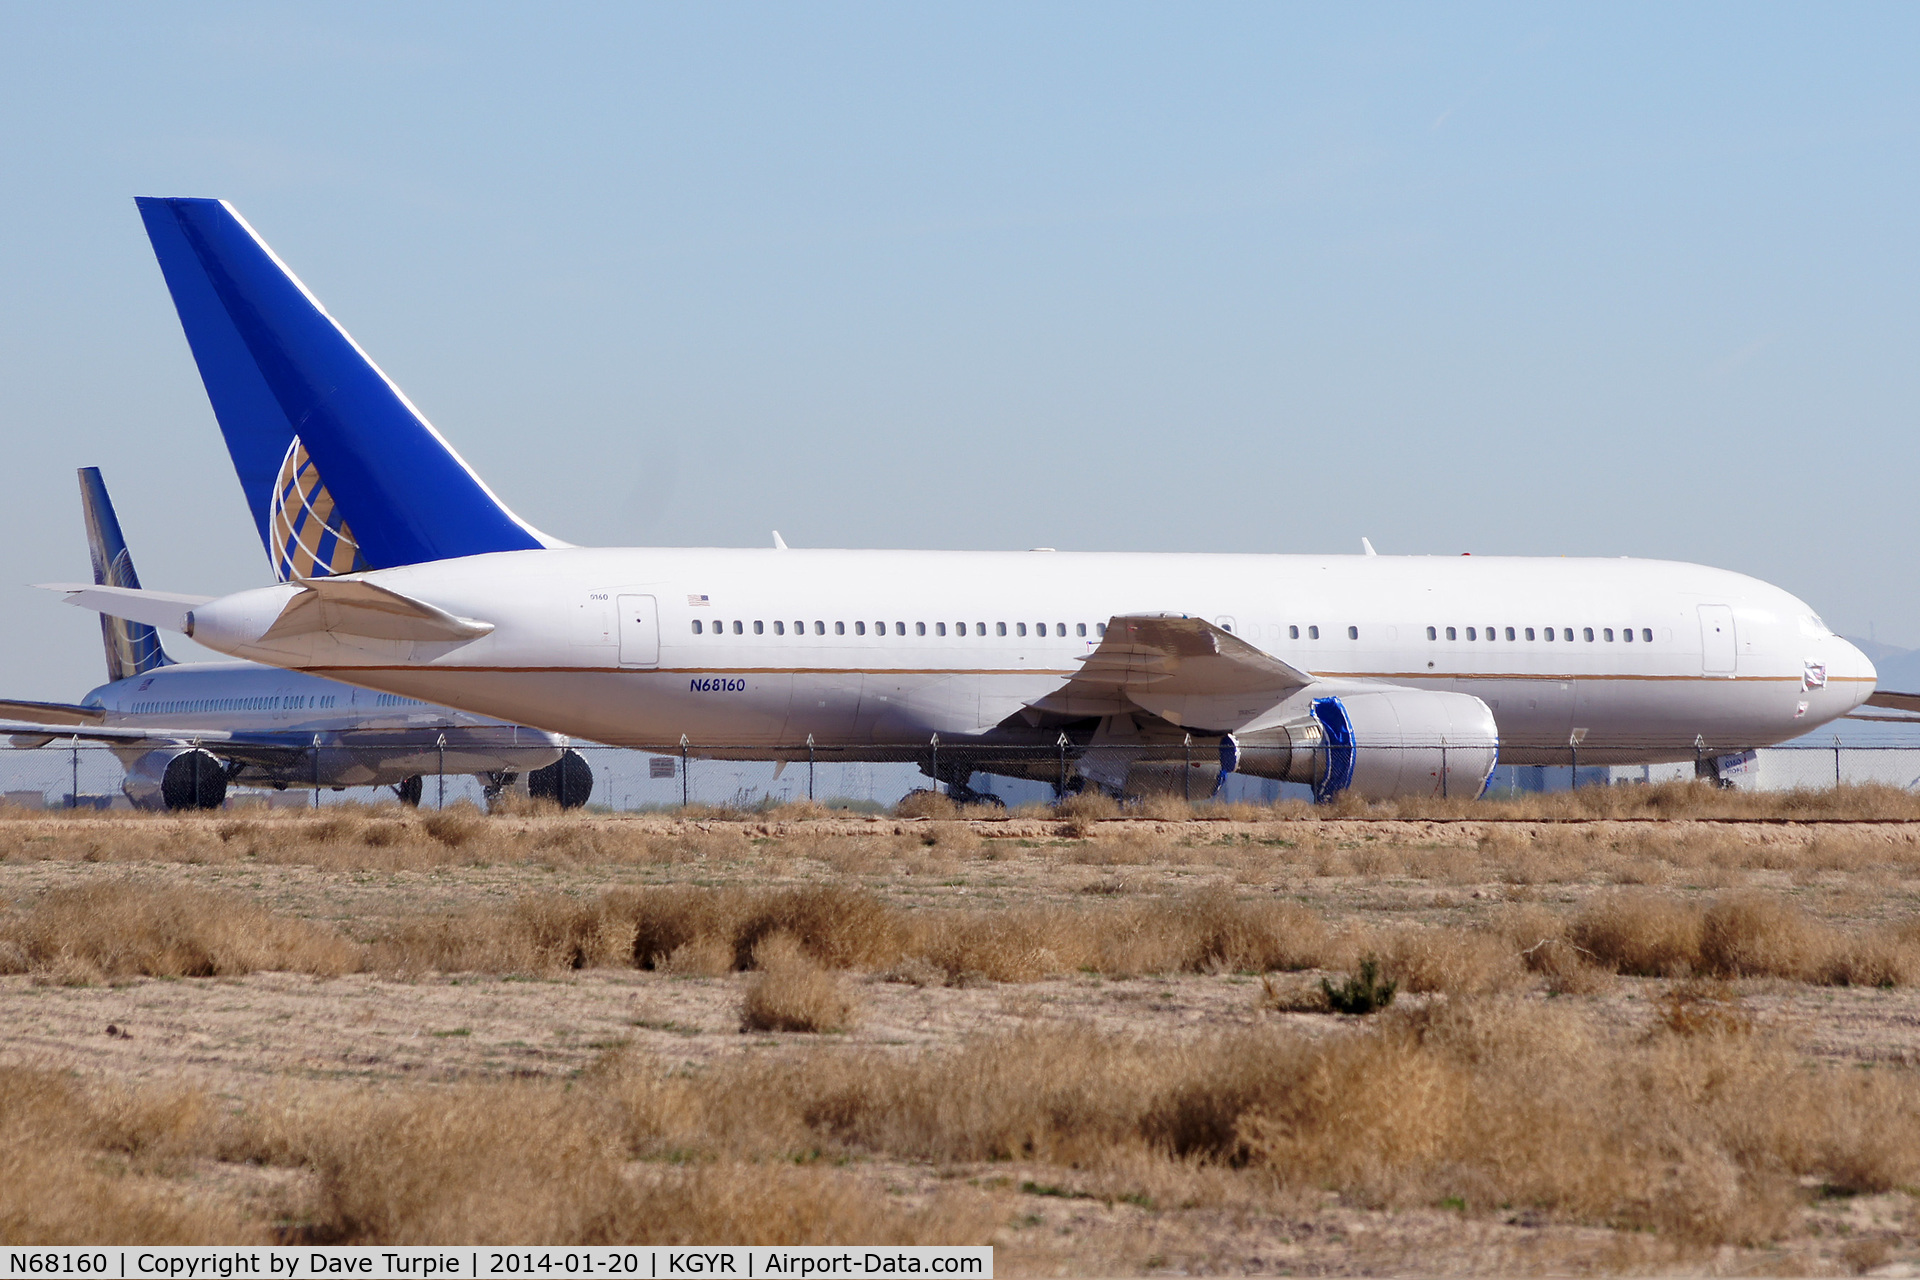 N68160, 2001 Boeing 767-224 C/N 30439, Formerly with Continental then United.  Awaiting a new assignment as VP-BAL.